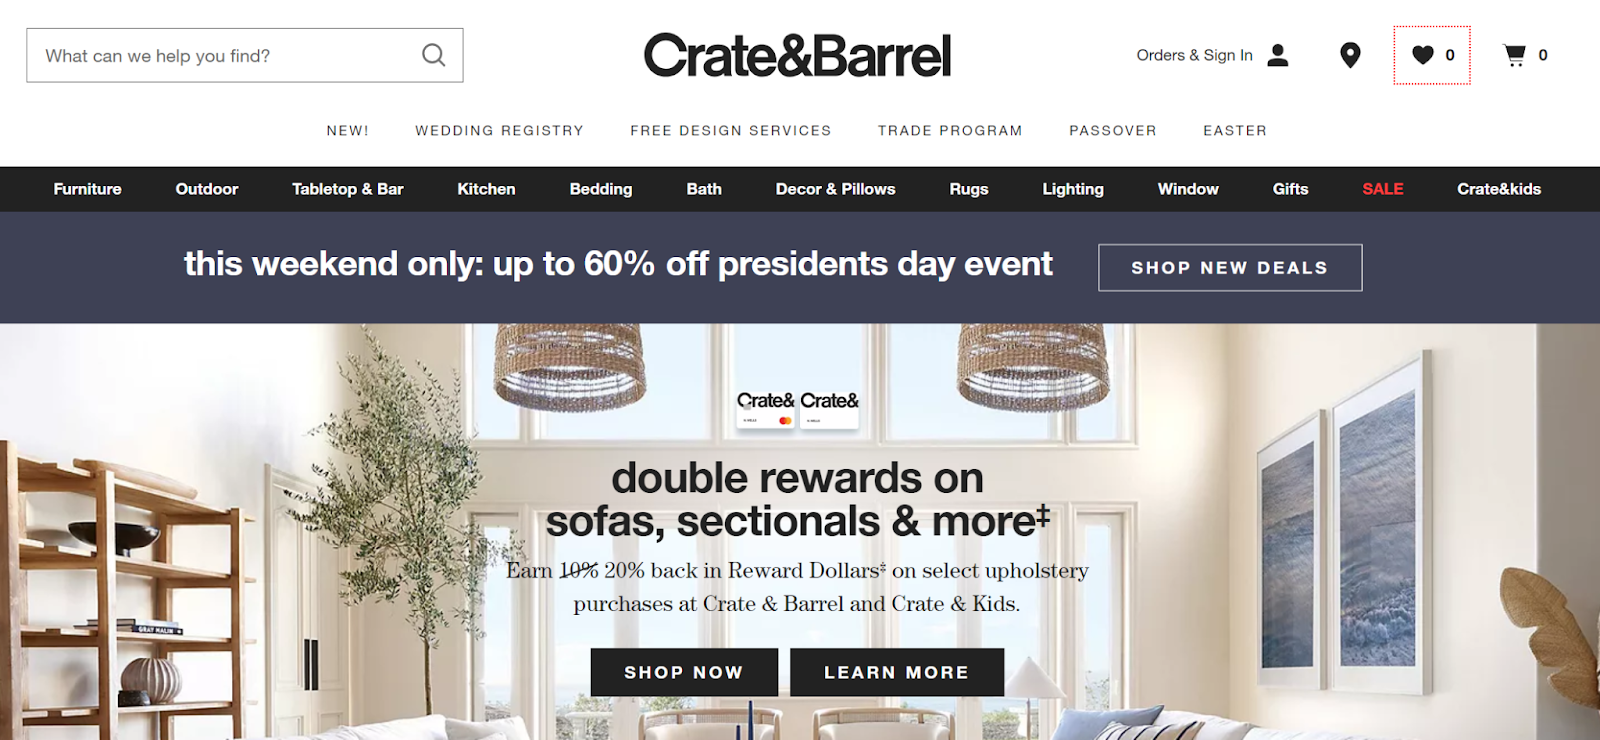 Crate And Barrel home page